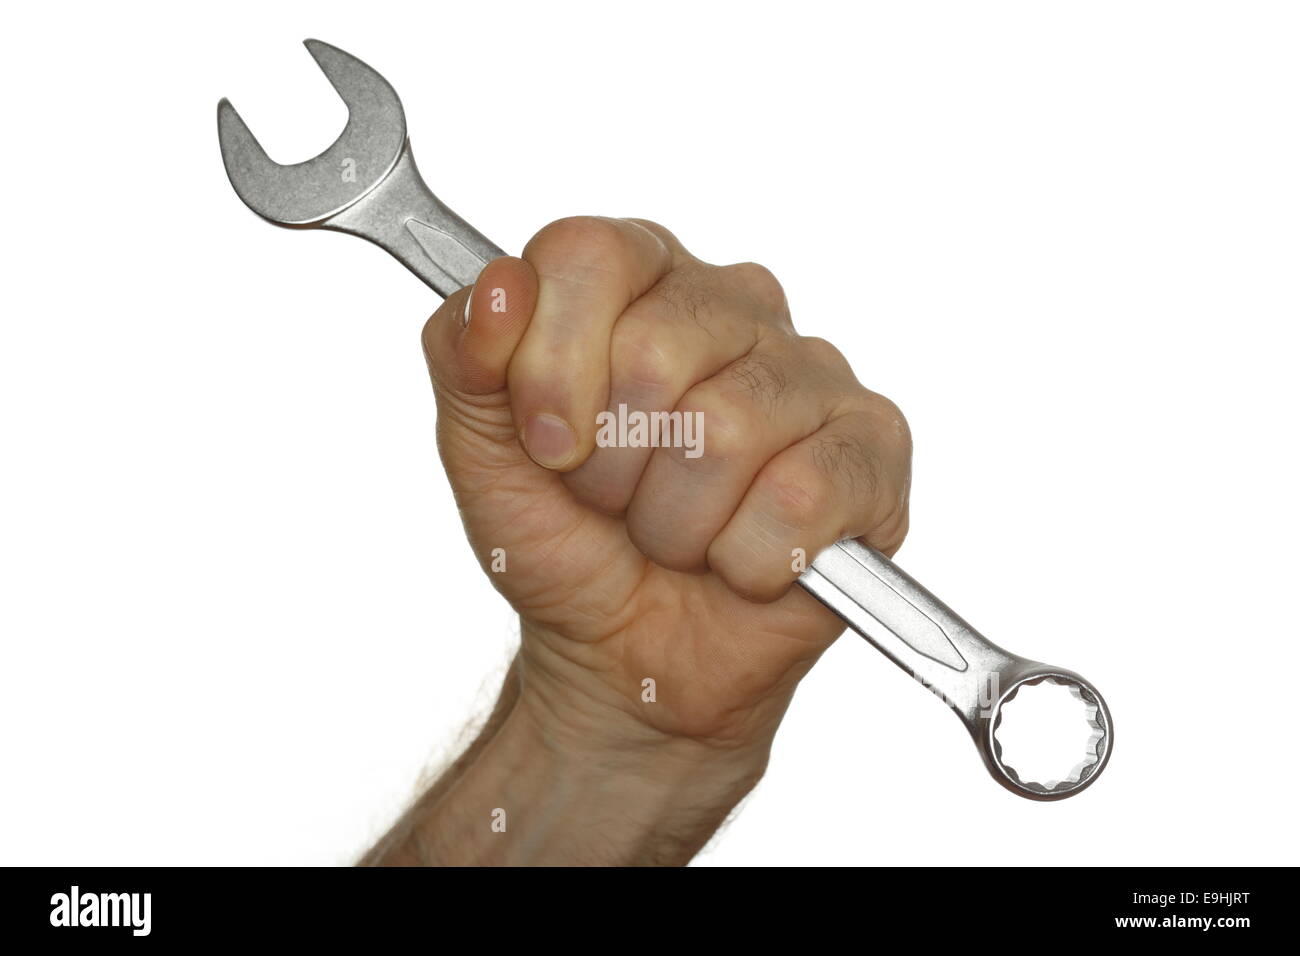 wrench in hand Stock Photo